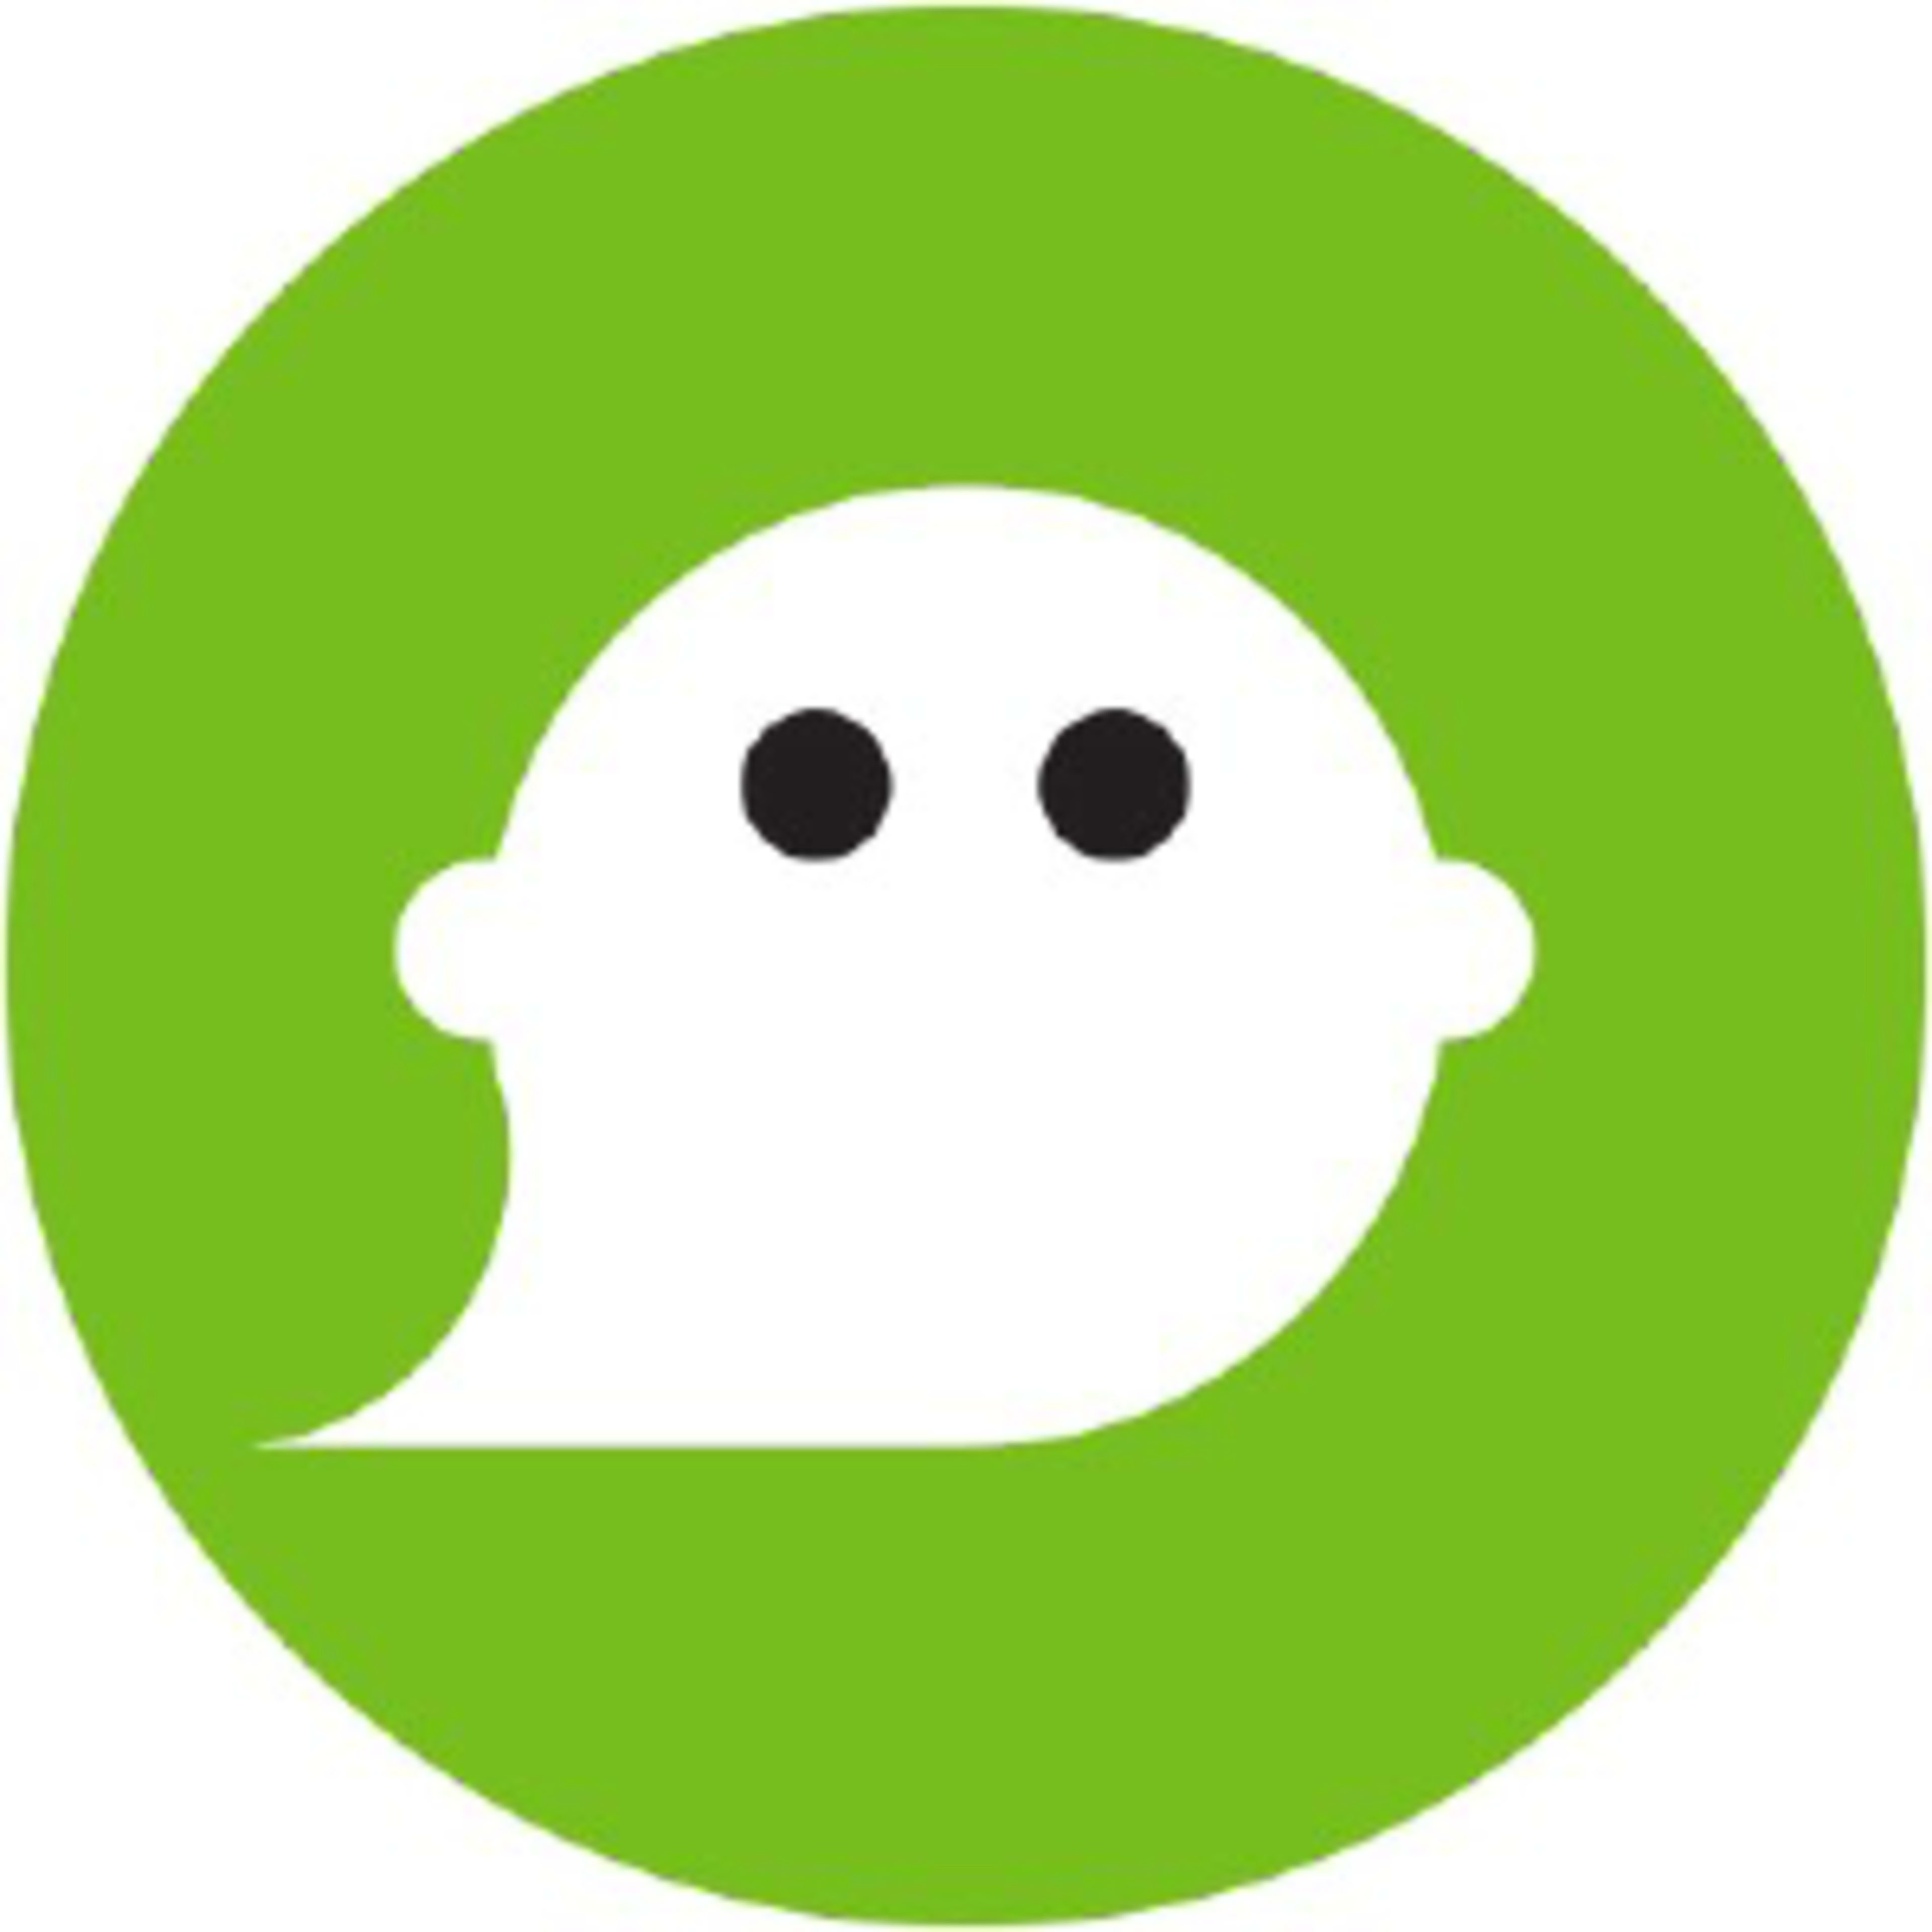 GhostBed Code